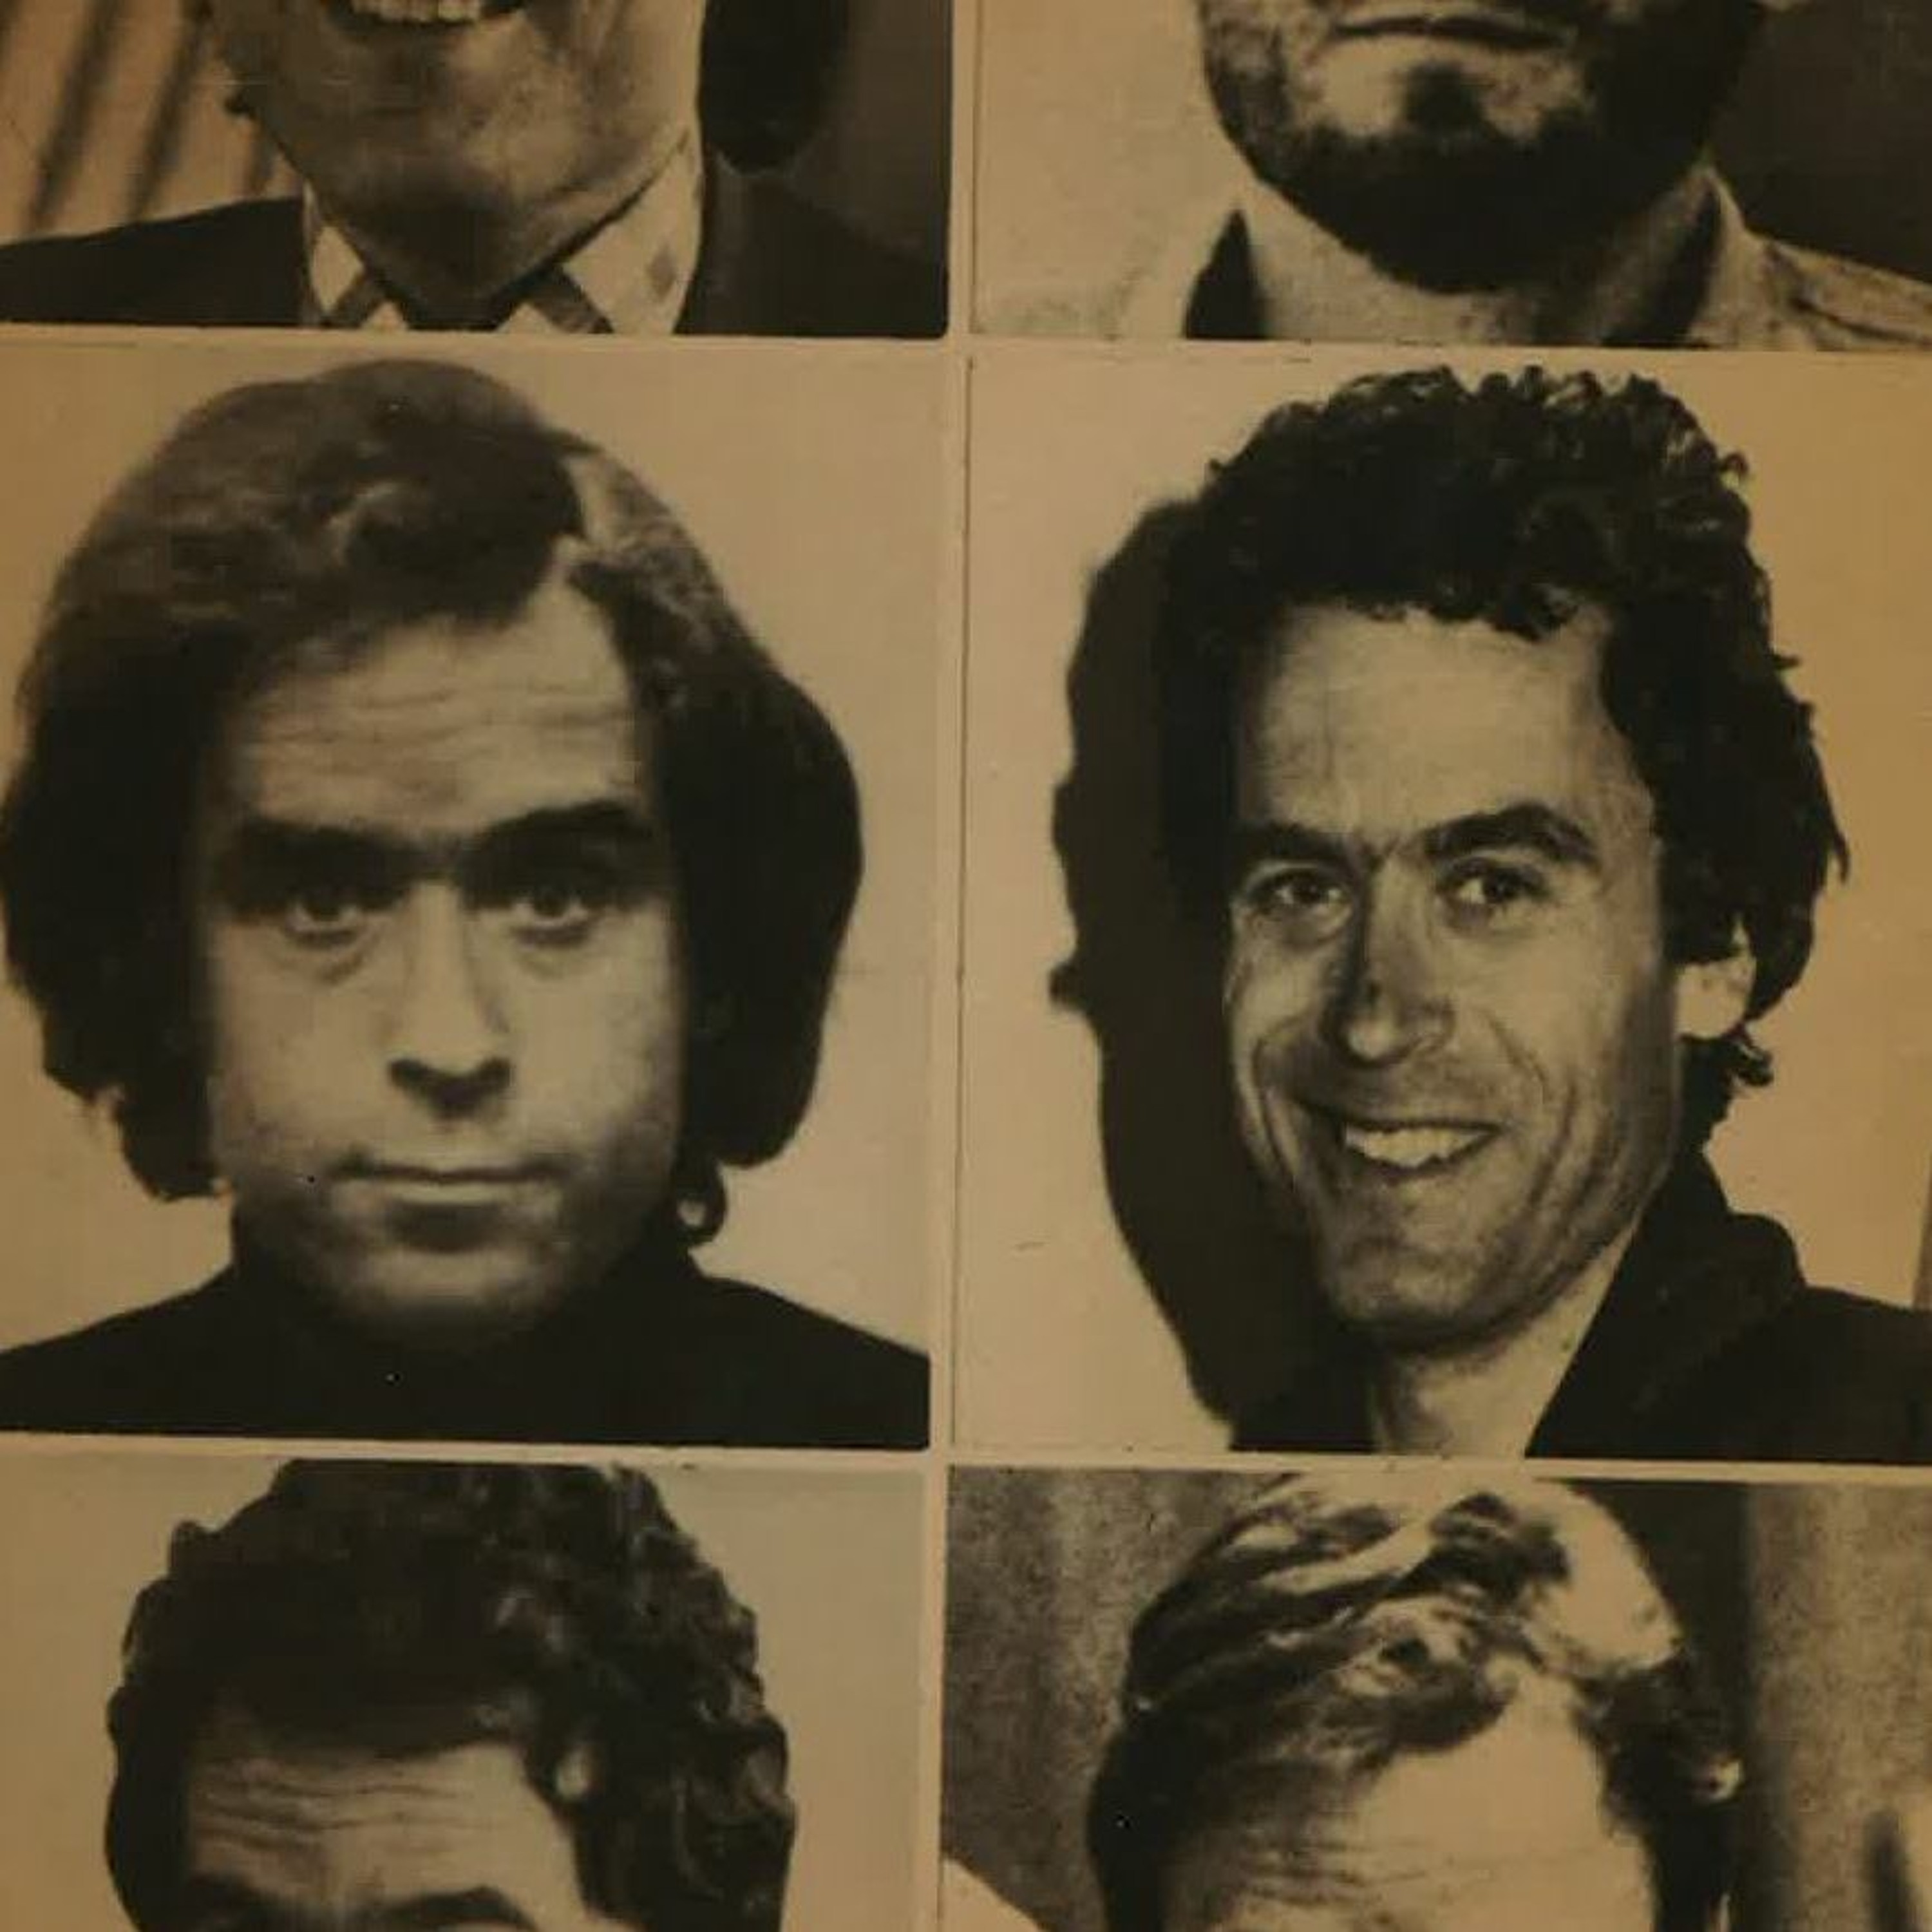 Introducing ”Hunted: Inside Ted Bundy’s trail of terror”